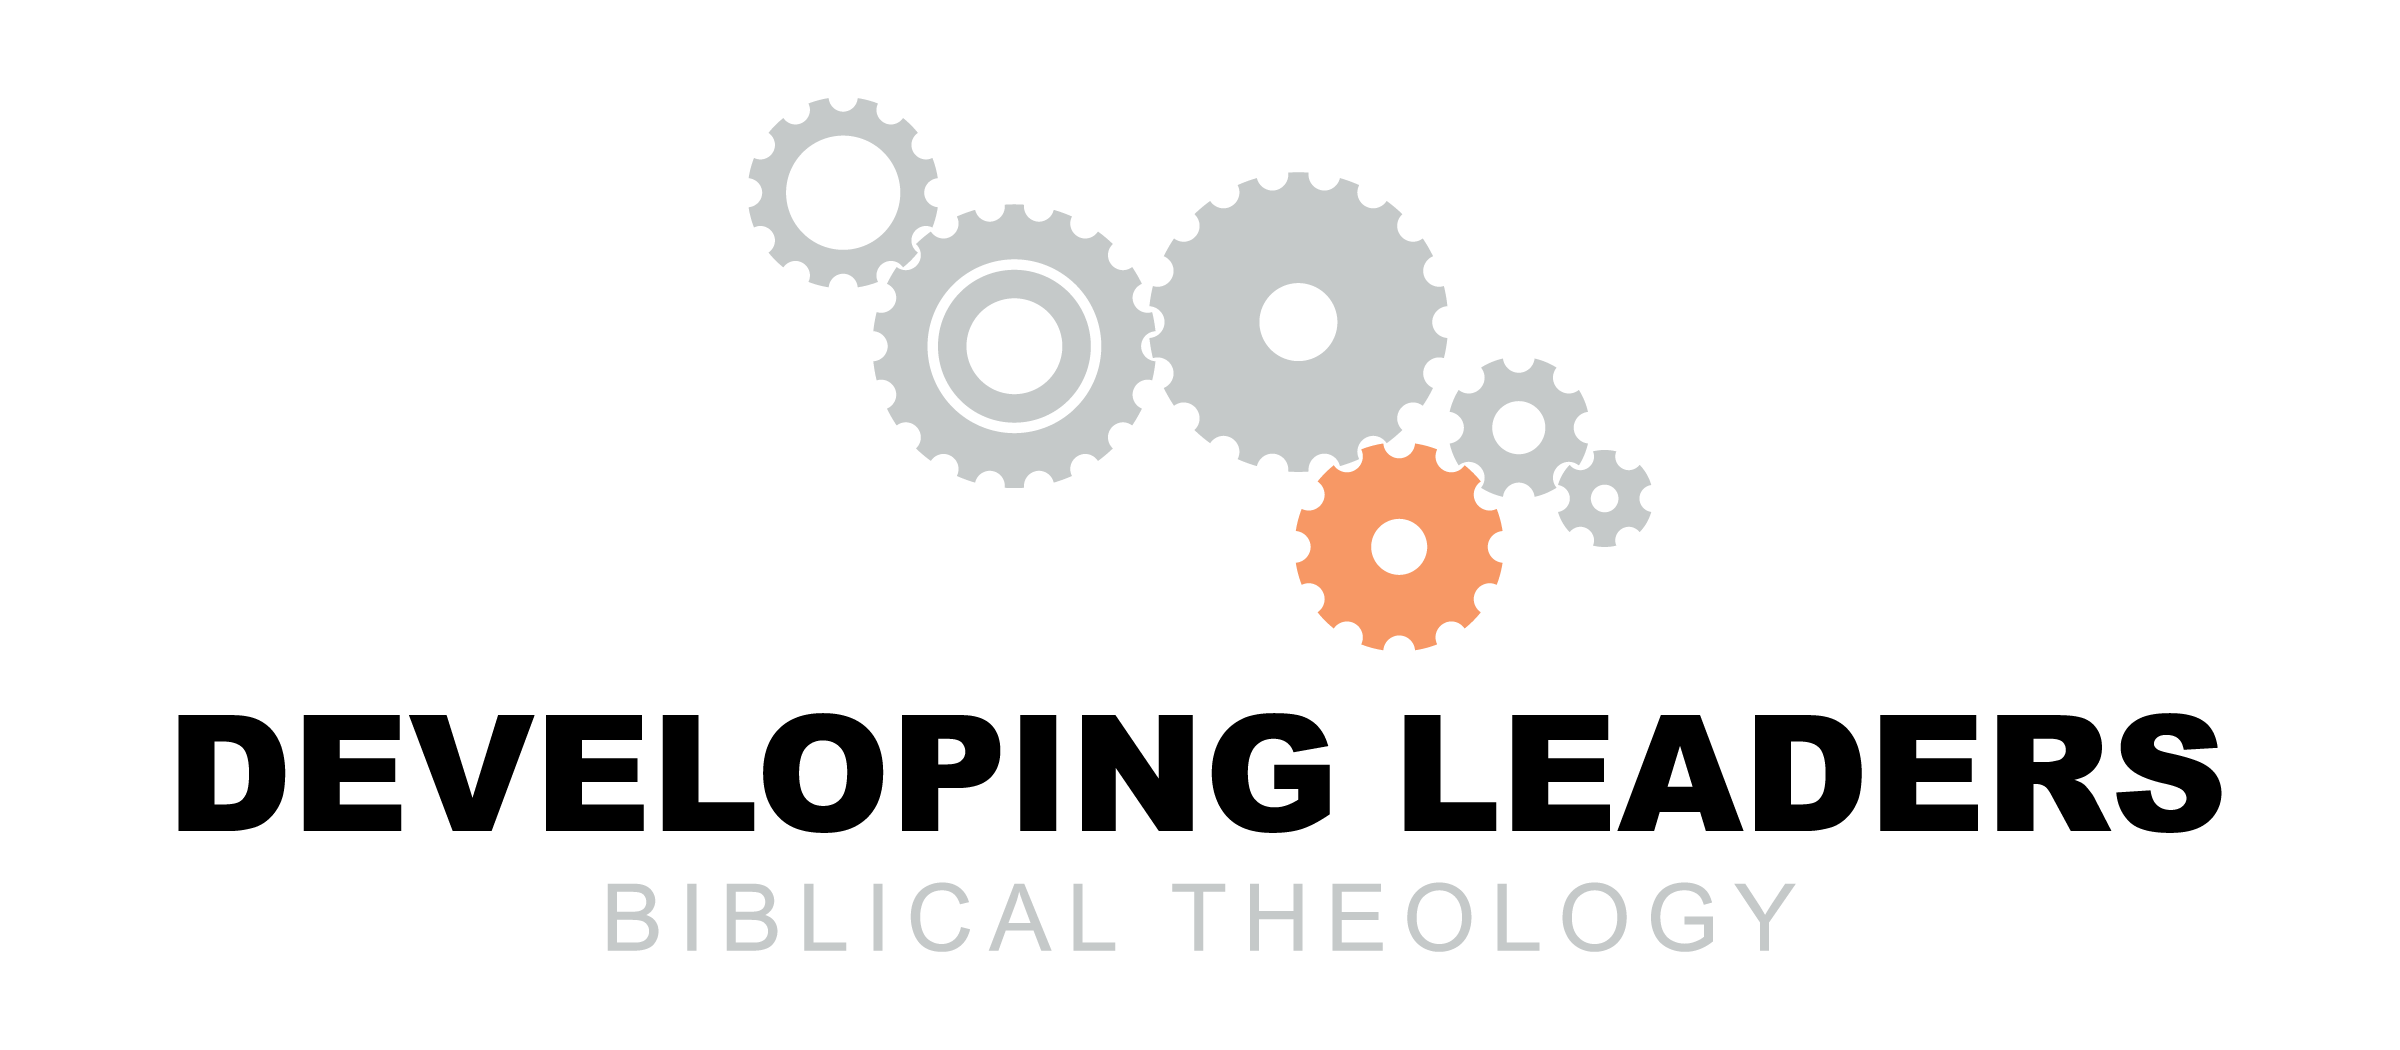 Developing Leaders Biblical Theology - 04 Gosplels - Acts